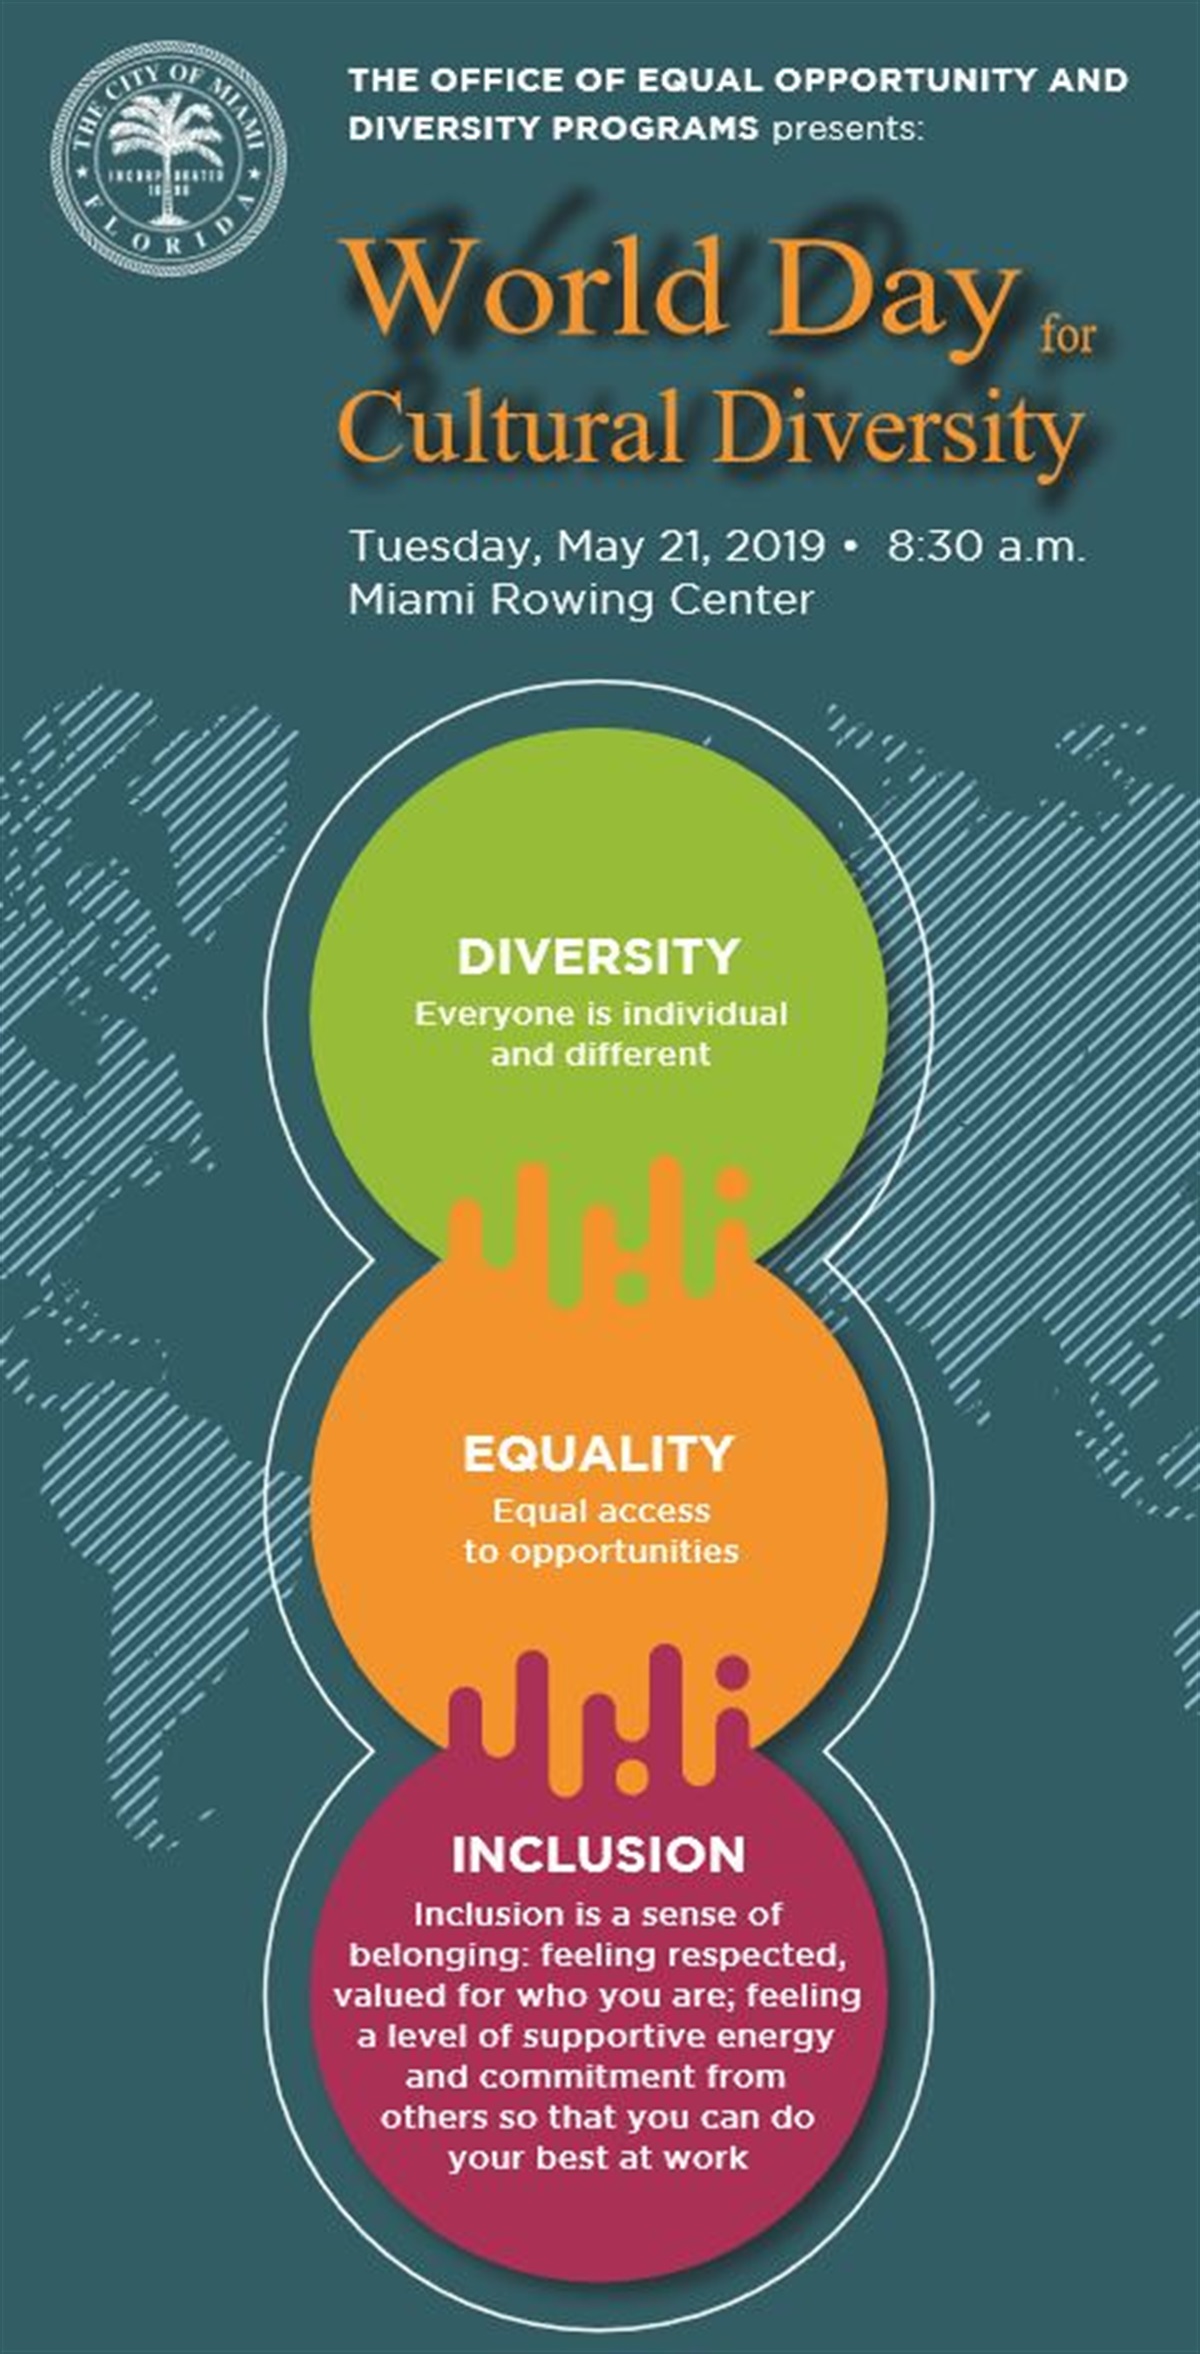 World Day for Cultural Diversity - Miami